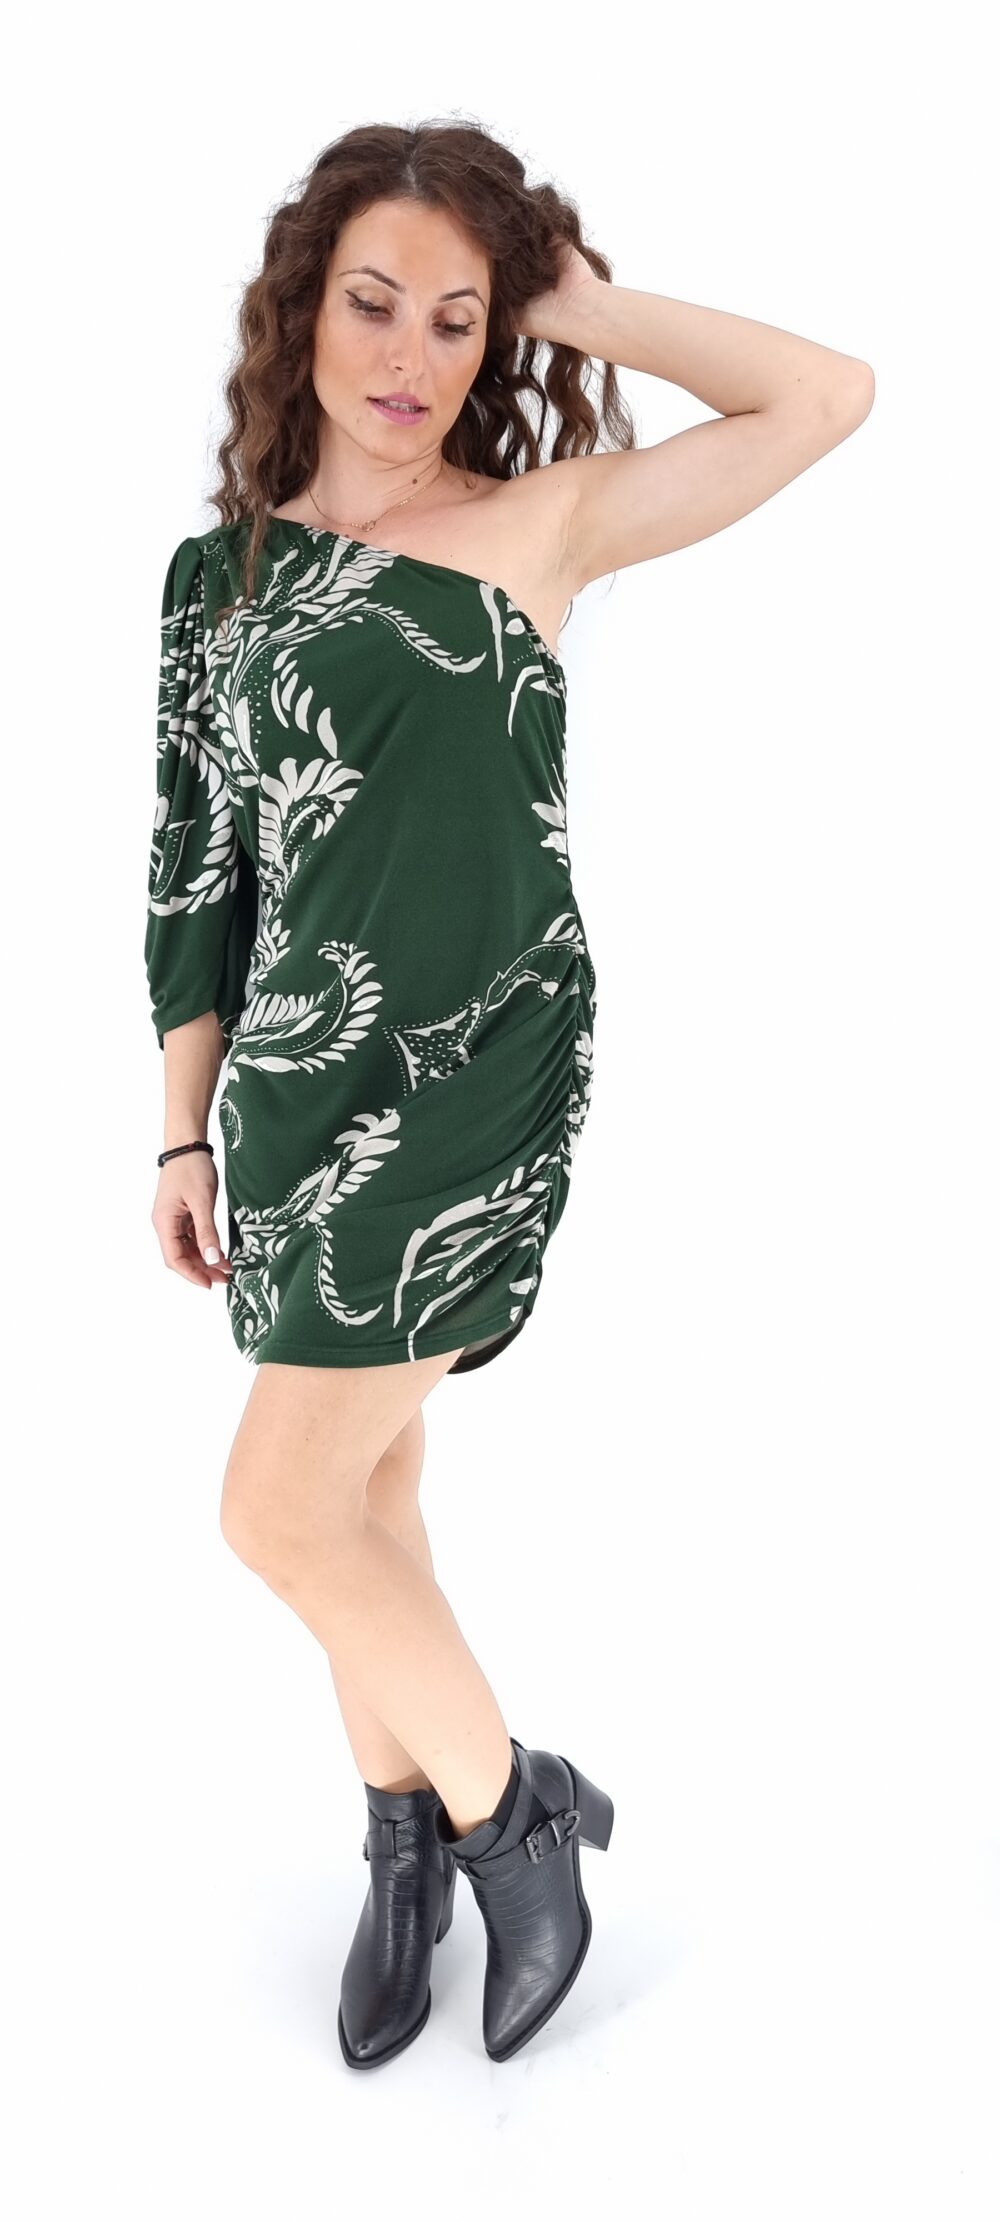 Short dress with a sleeve and white designs green